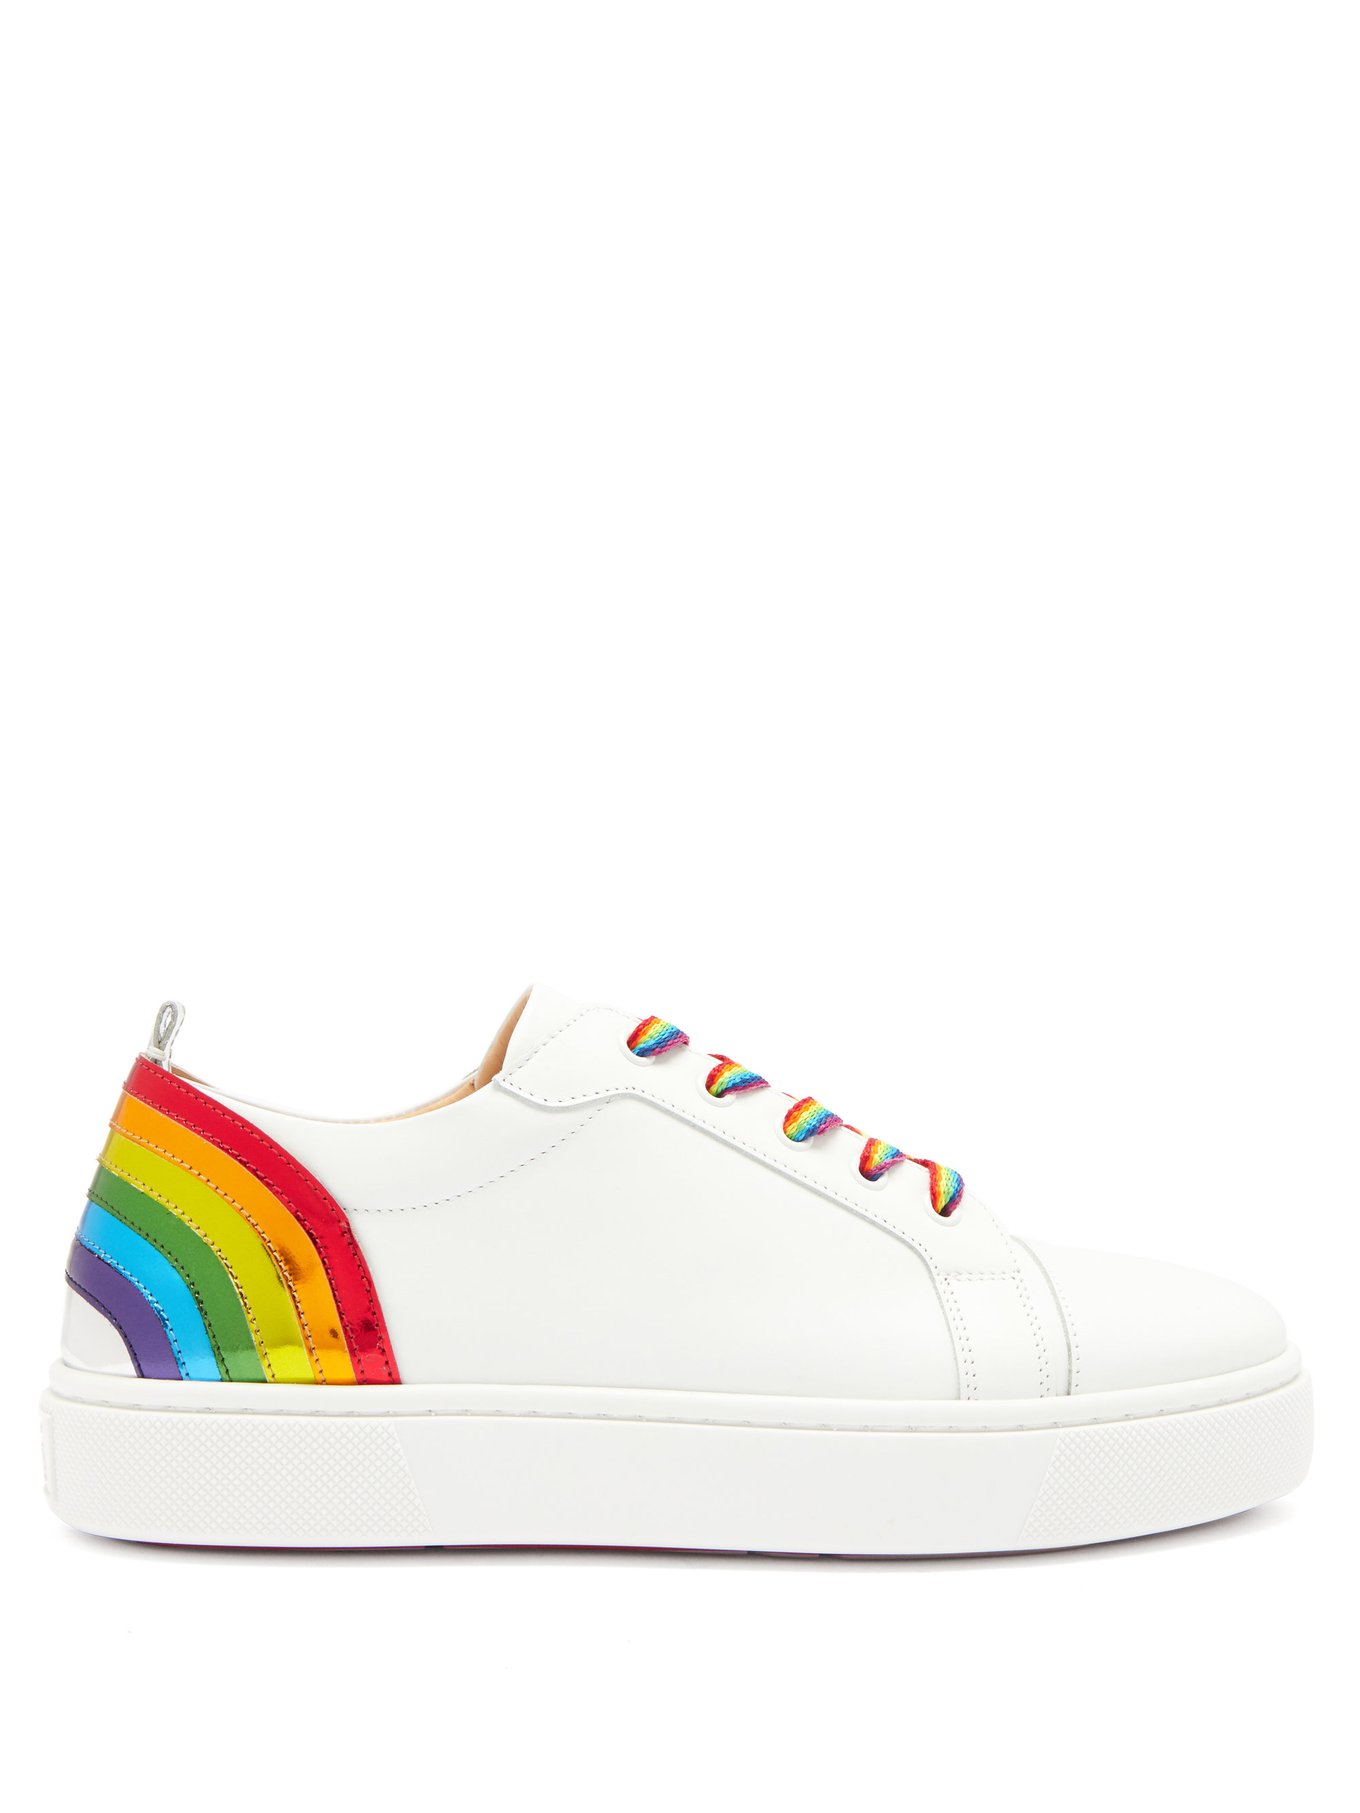 Christian Louboutin - Arkenspeed Rainbow Leather Trainers - Womens - White Multi